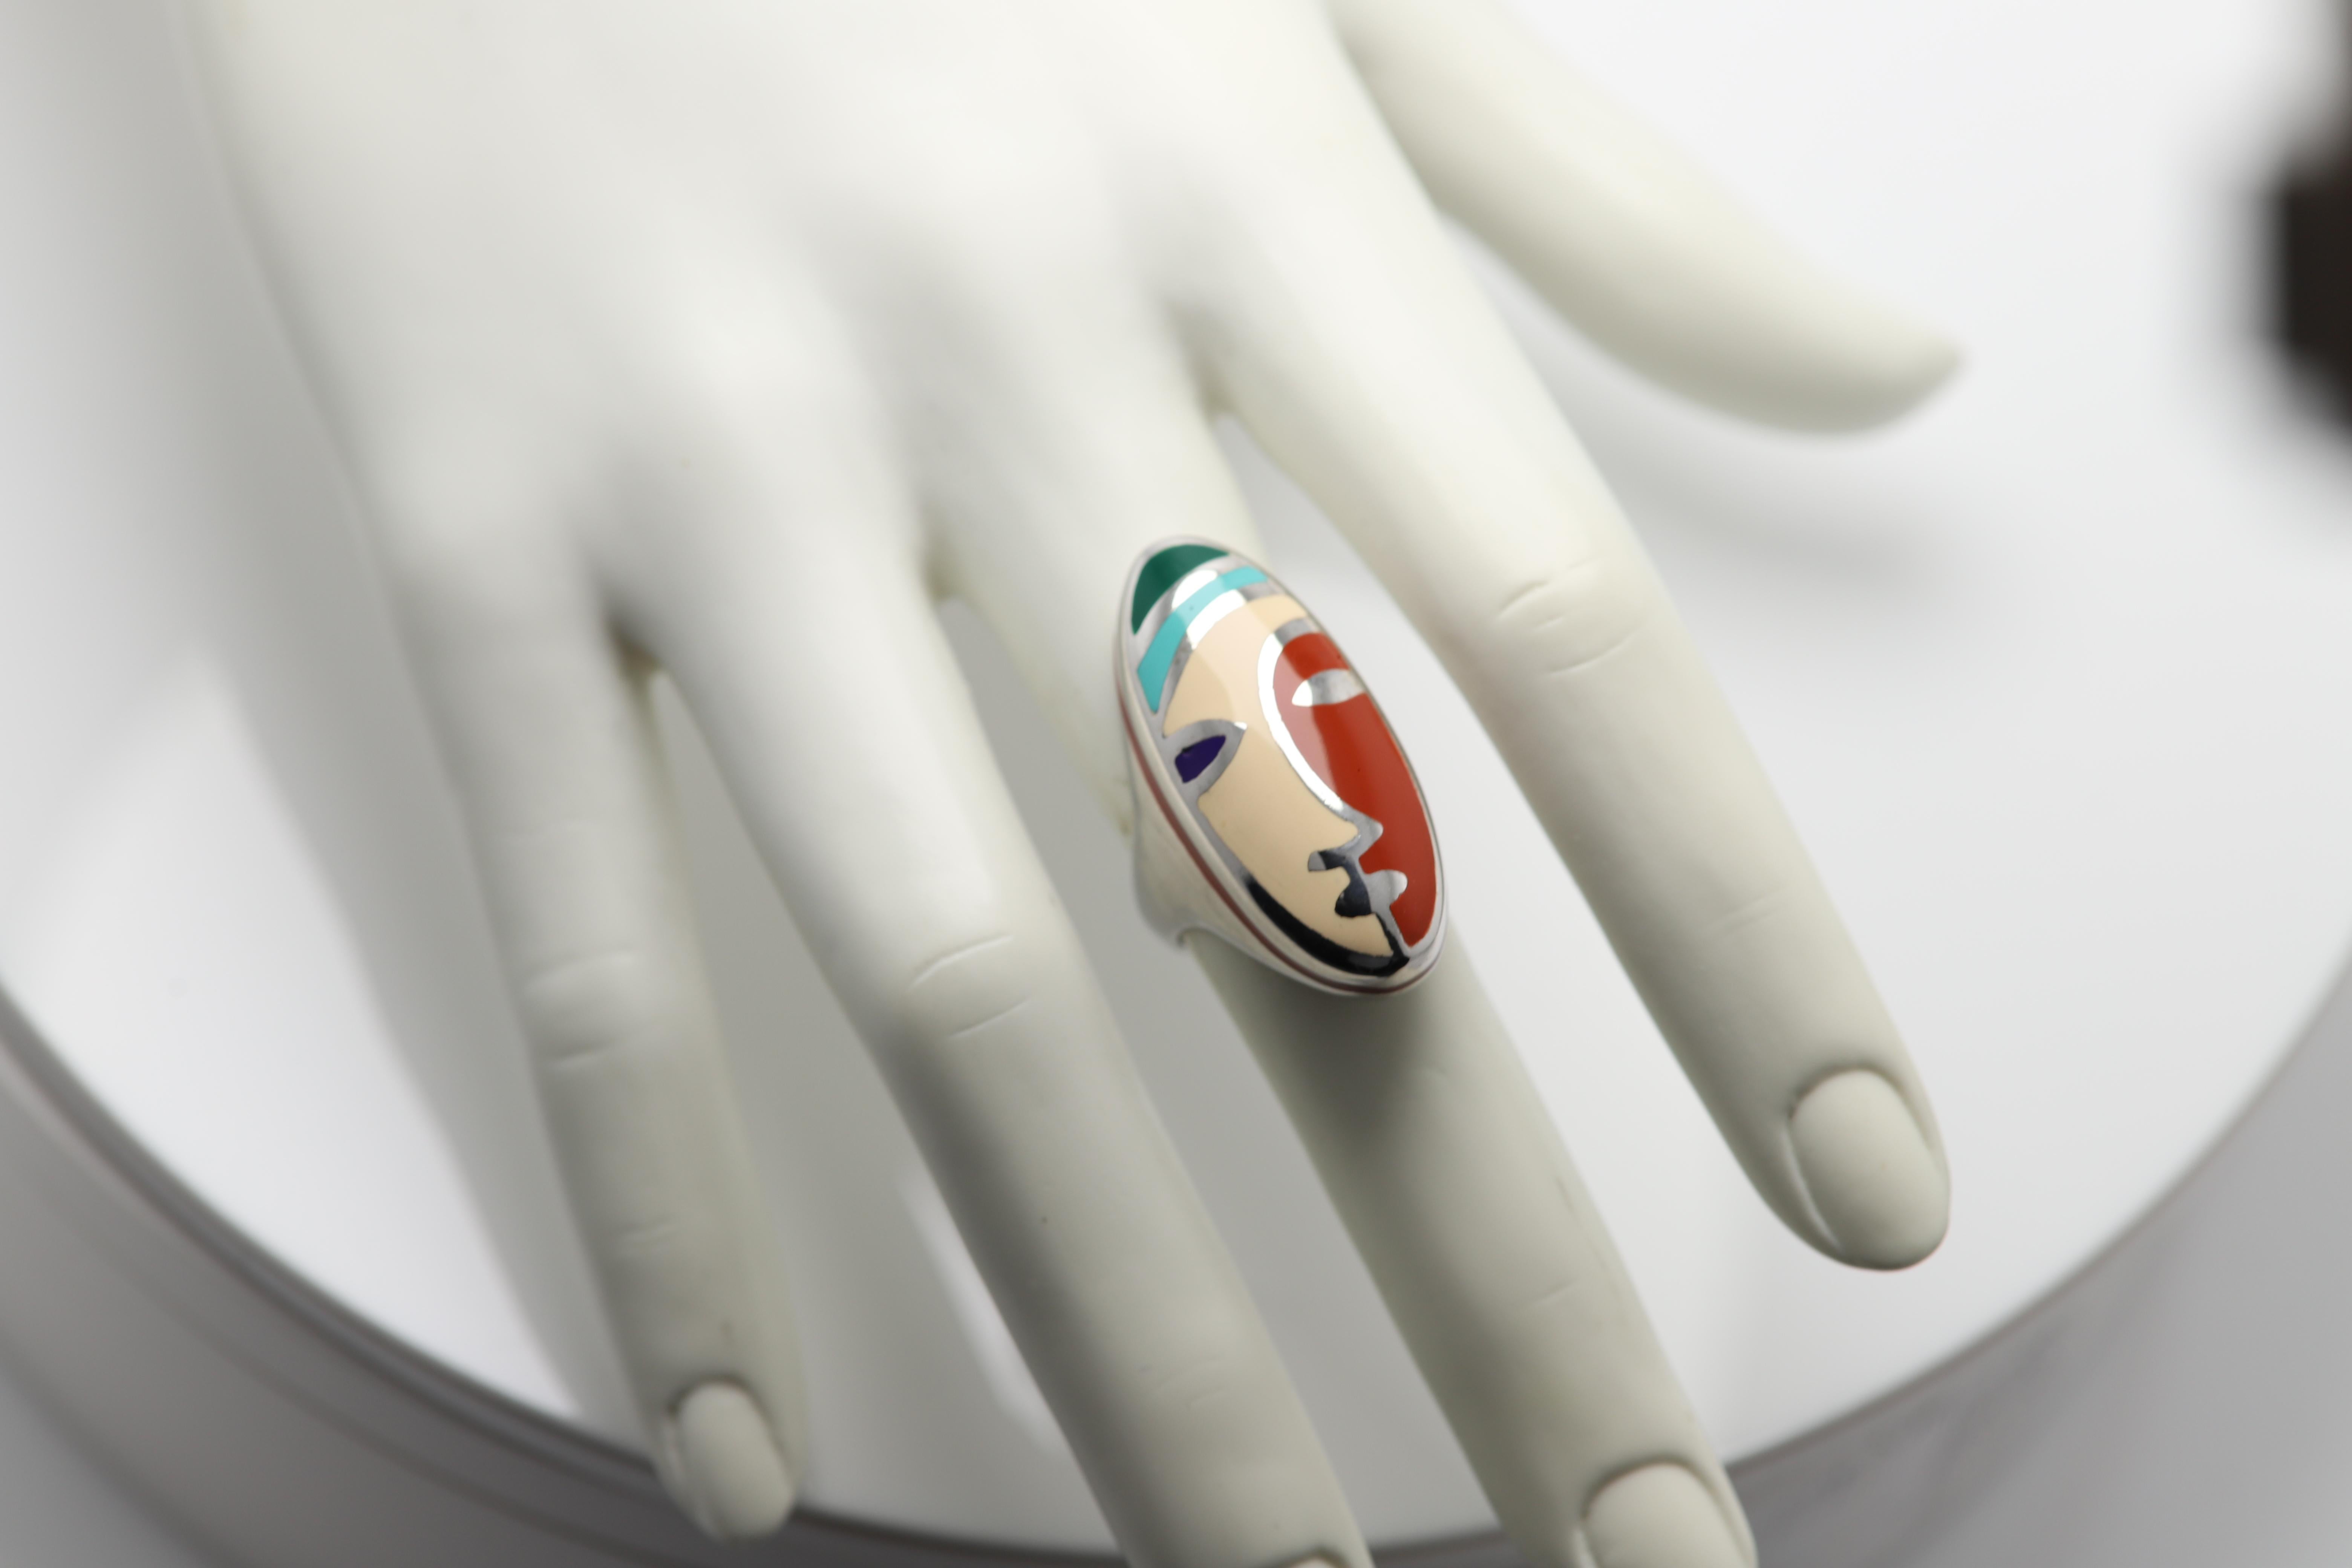 Enamel Artistic Art Ring Inspired by famous world artist sterling silver 925 hand made in Italy finger size 6.5  (NOT RESIZABLE) . Approx design area size 33 x 15mm (1.25' inch long) Slightly imperfections may exist due to manufacturing process, any